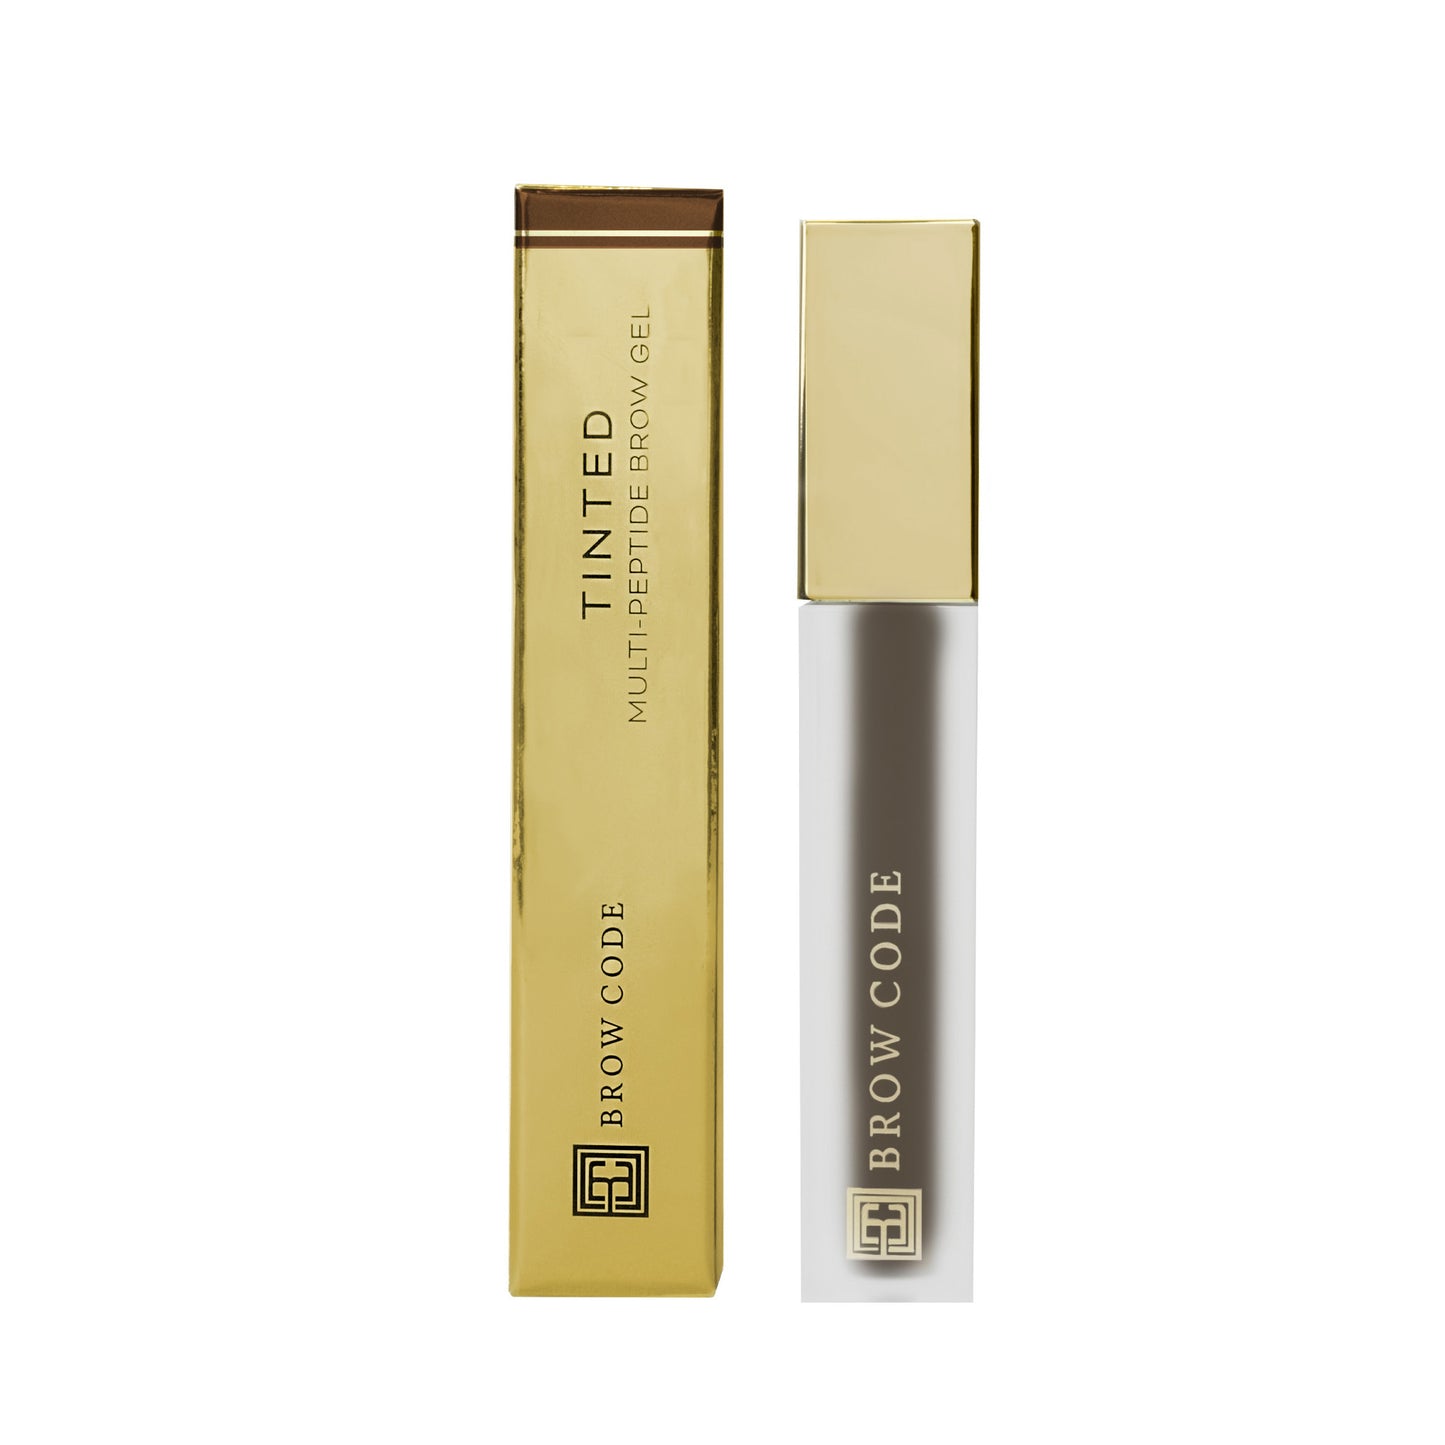 Tinted Multi-Peptide Brow Gel - Color-Chocolate - product alongside packaging against a white background